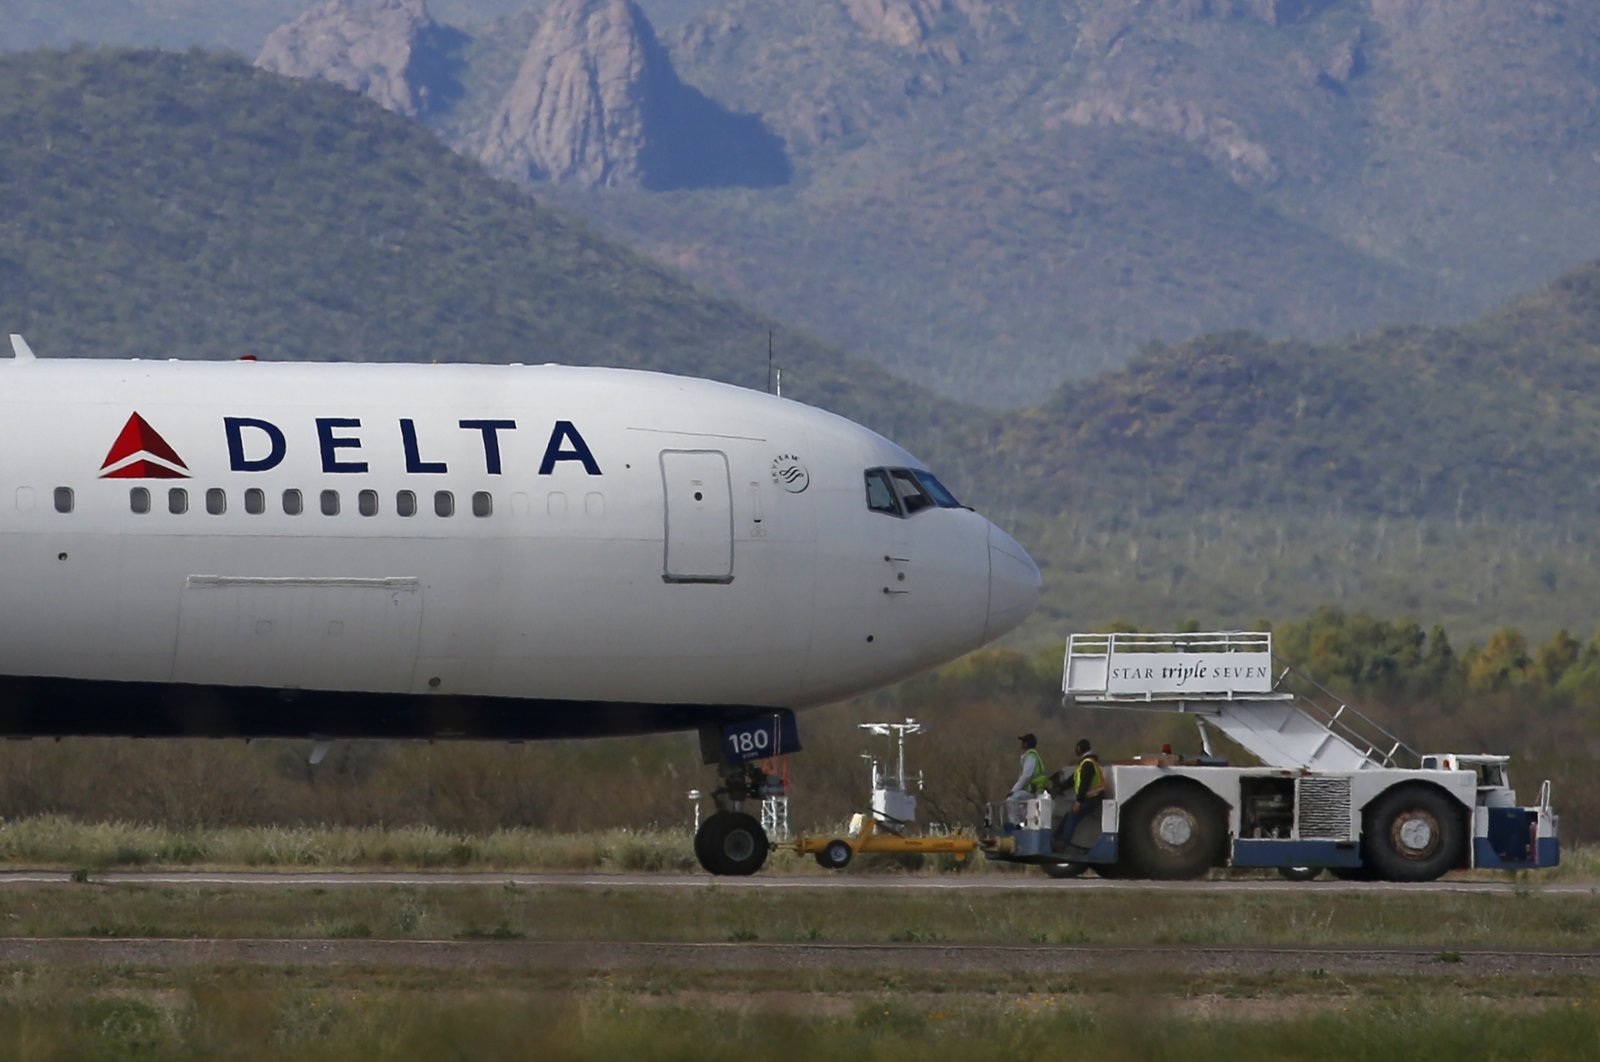 A recently landed Delta Air Lines airplane is worked on by ground crew at Pinal Airpark Wednesday, March 18, 2020. (AP Photo)